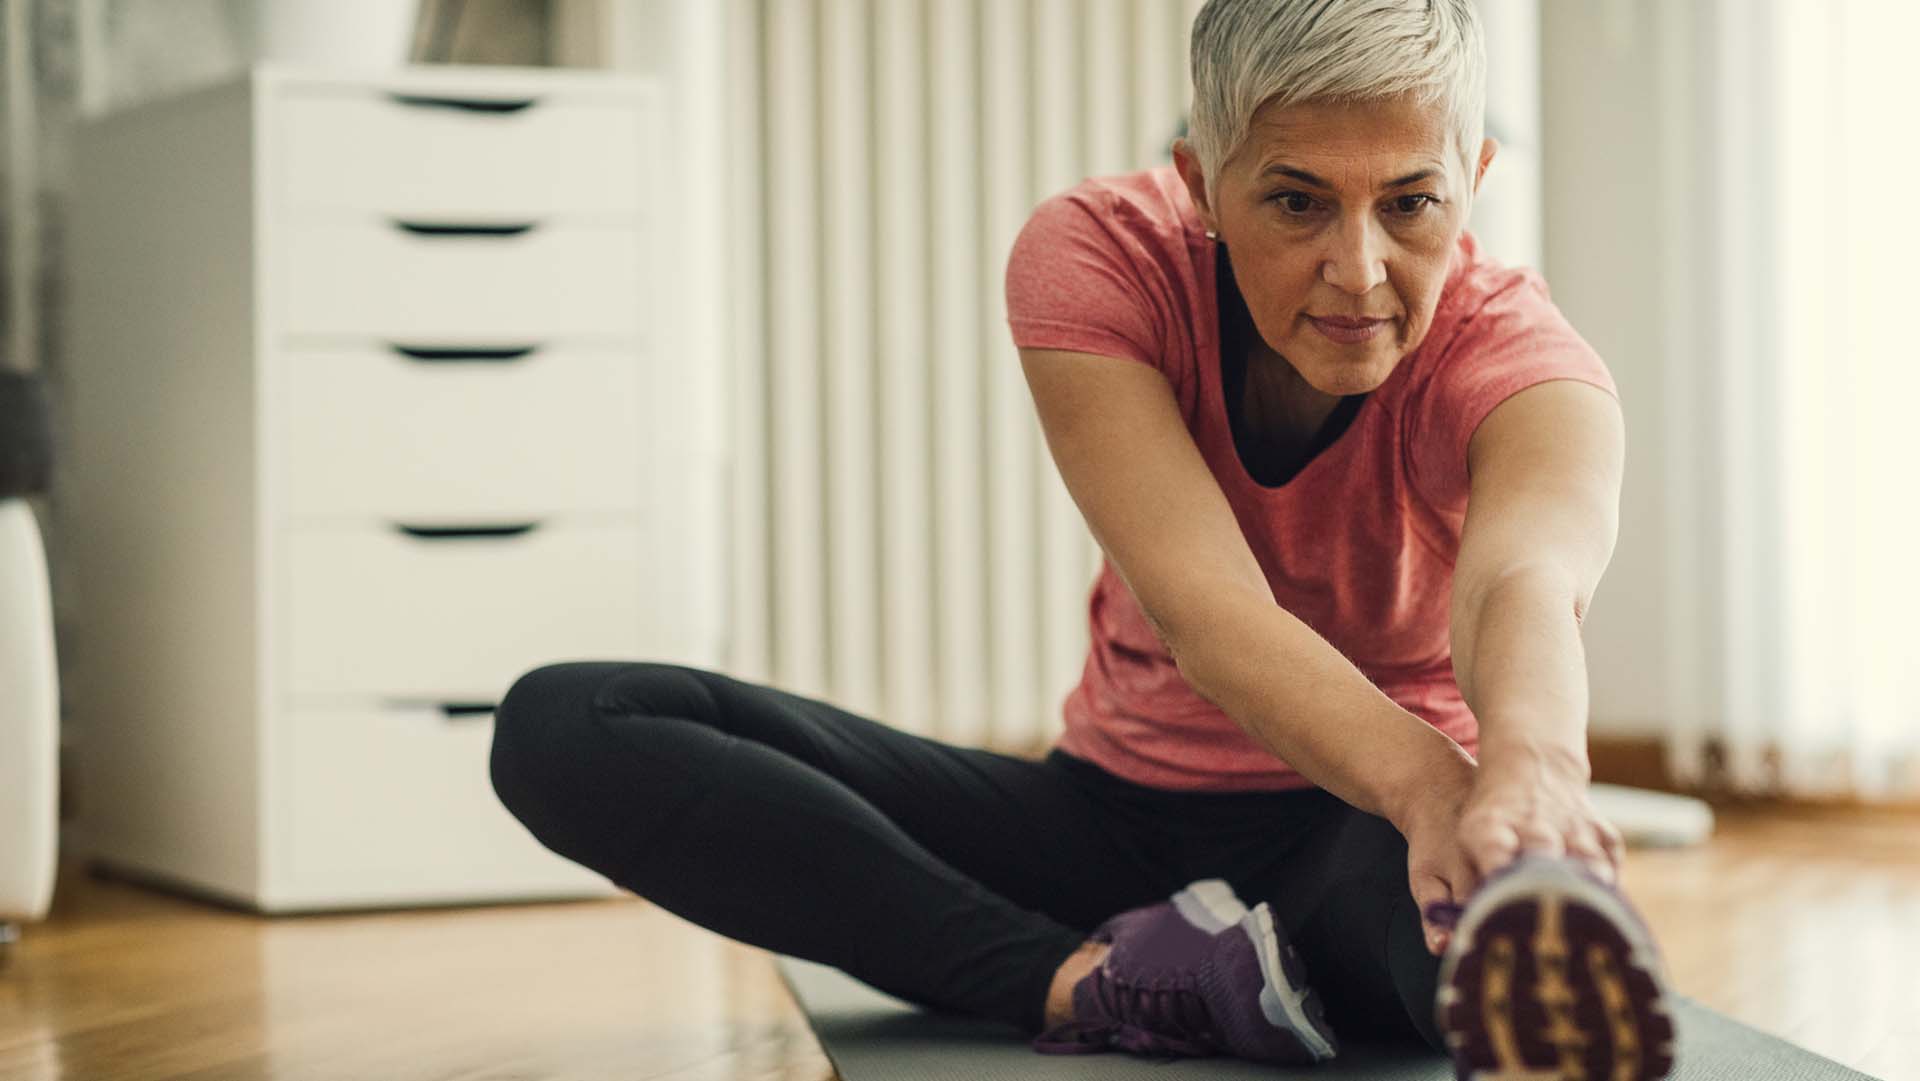 Mature woman exercising at home. Sitting on exercise mat and working stretching exercise , stretching her legs.